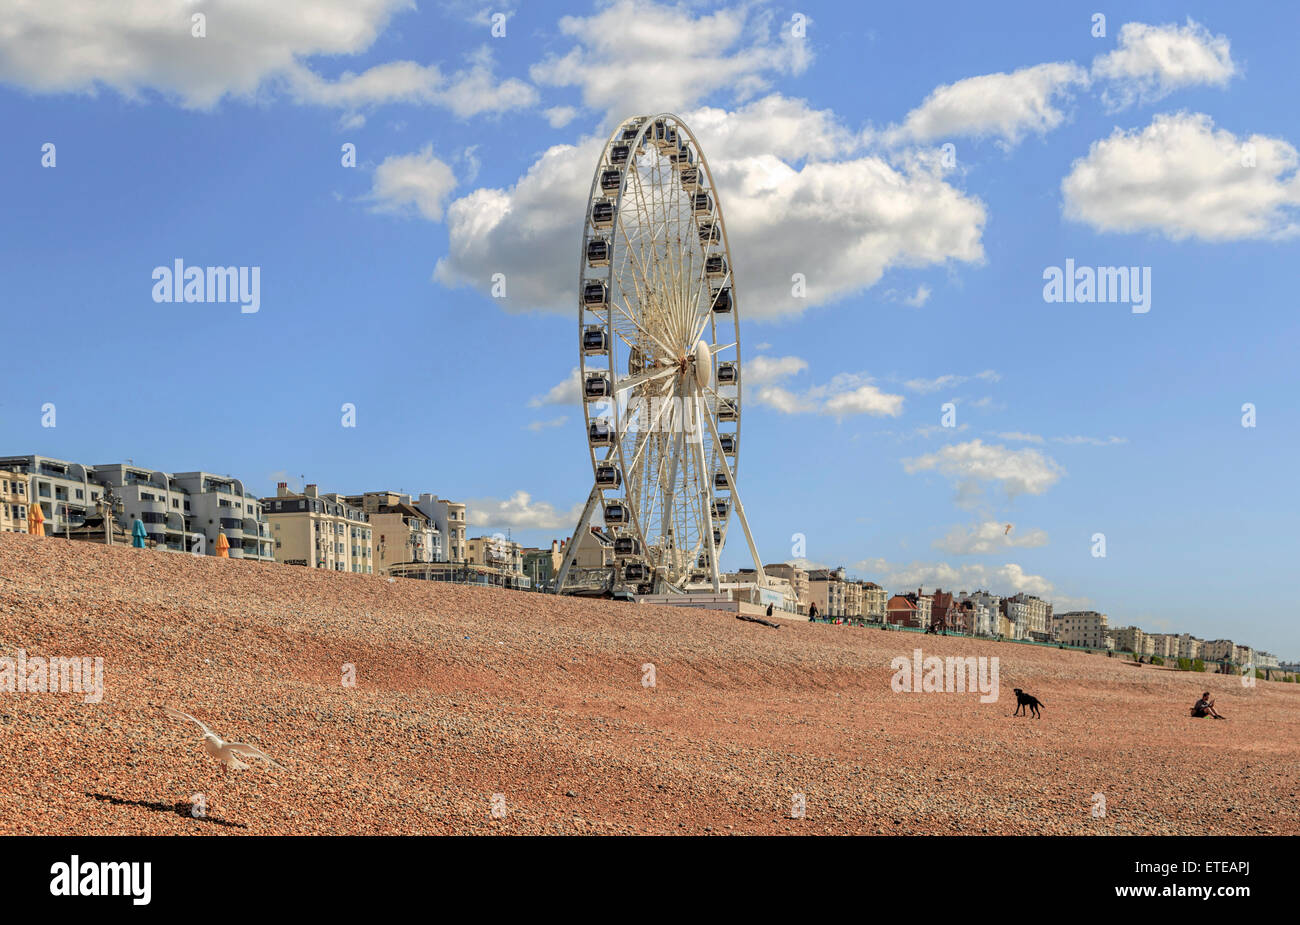 View on the Brighton Wheel (ferris wheel) on a sunny day in spring, Brighton seafront, East Sussex, England, United Kingdom. Stock Photo